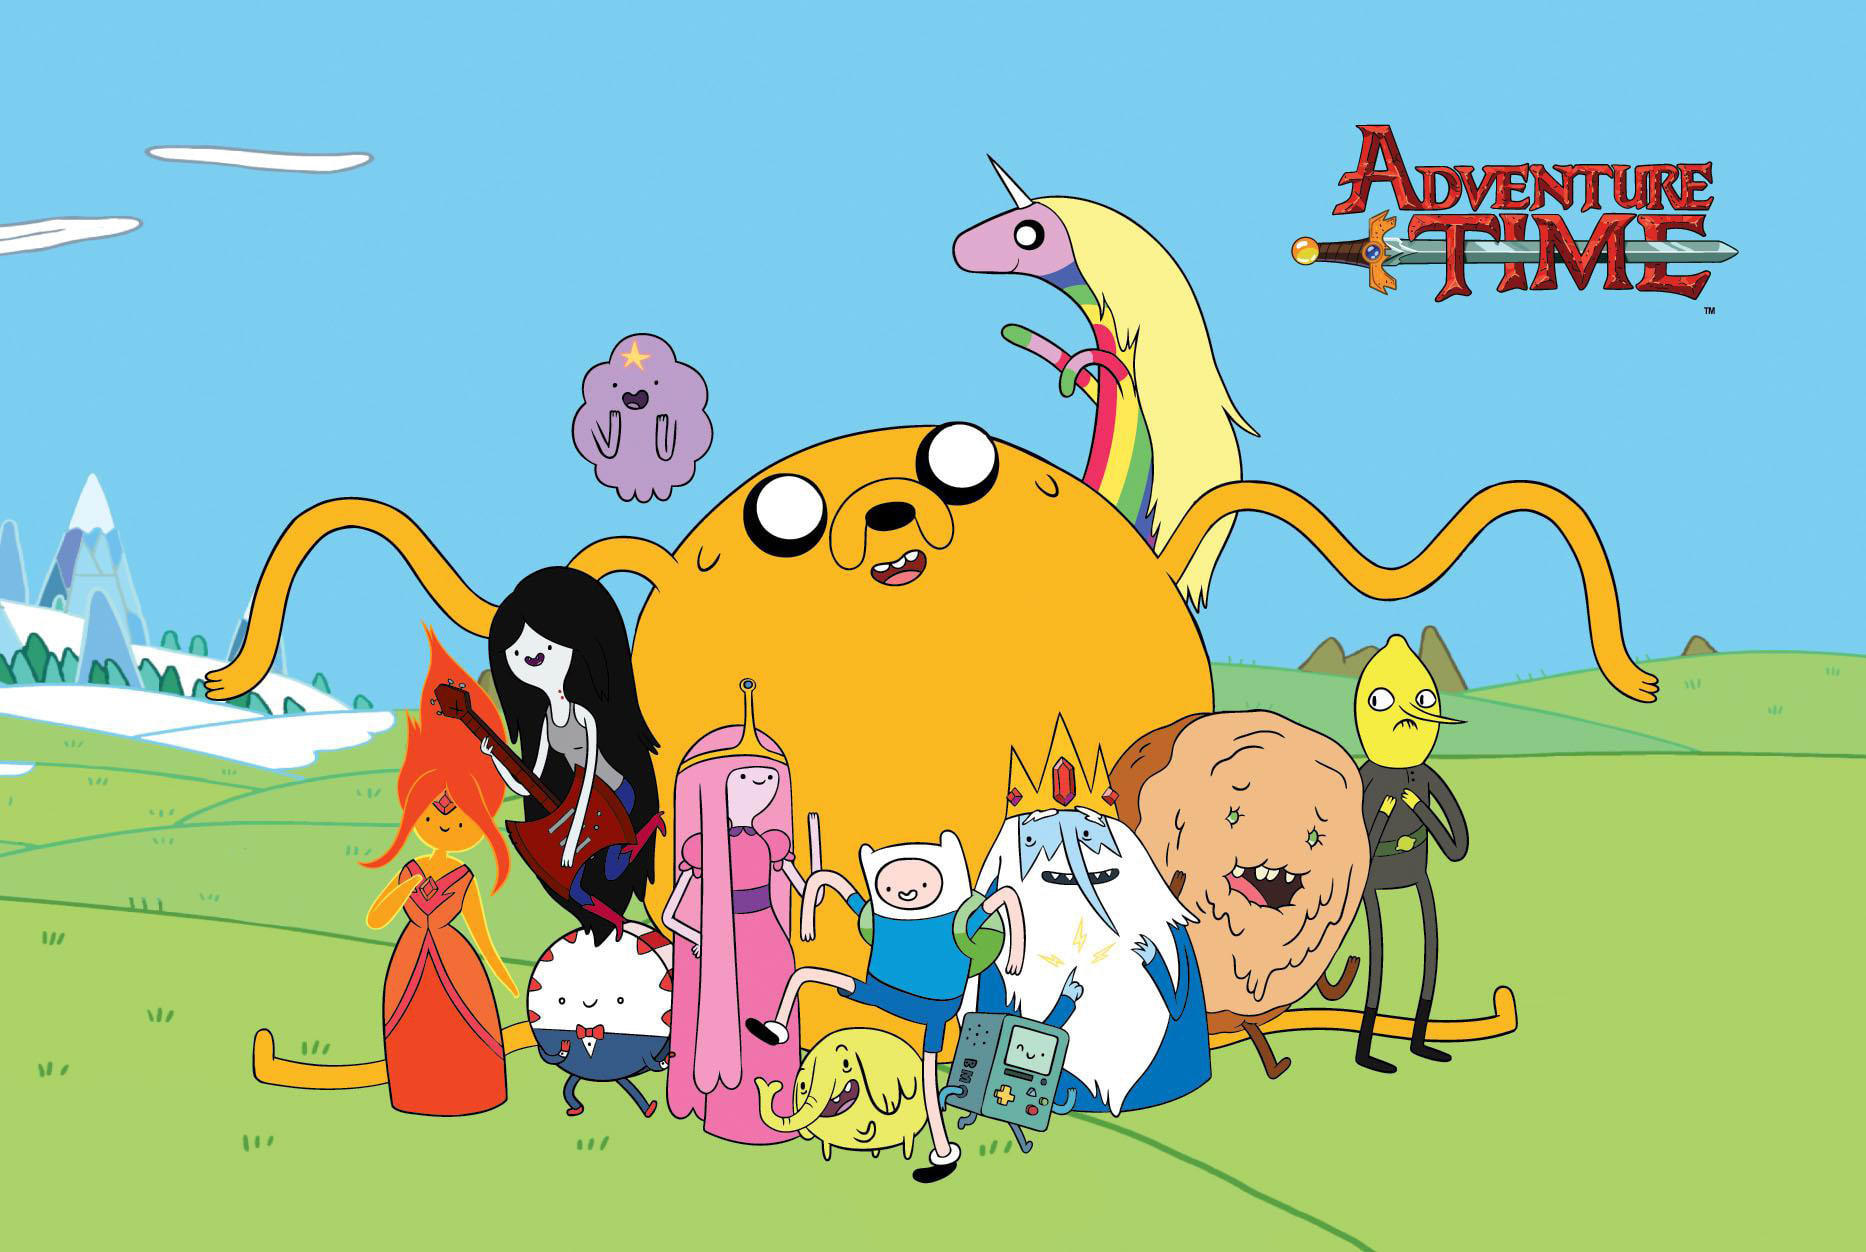 Adventure Time: 4 shows to watch after the up